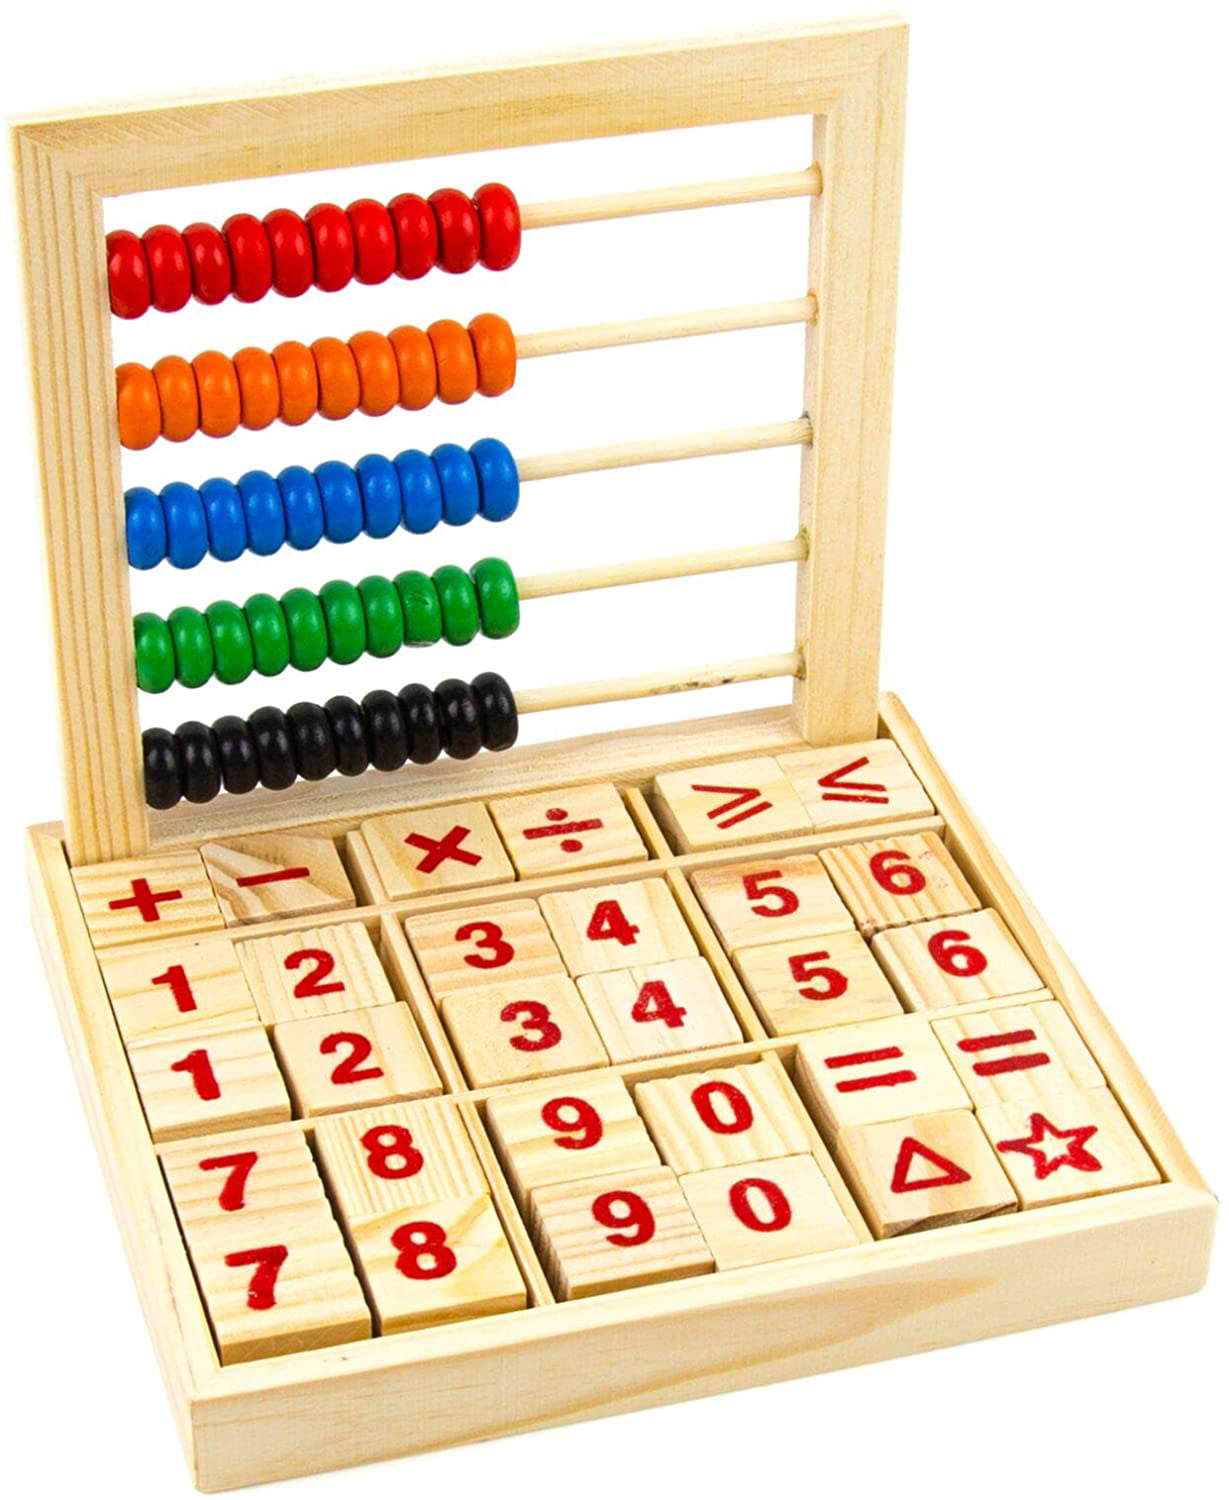 Promote Learning Calculations 50 Beads and 30 Block Abacus Study Blocks Wood 